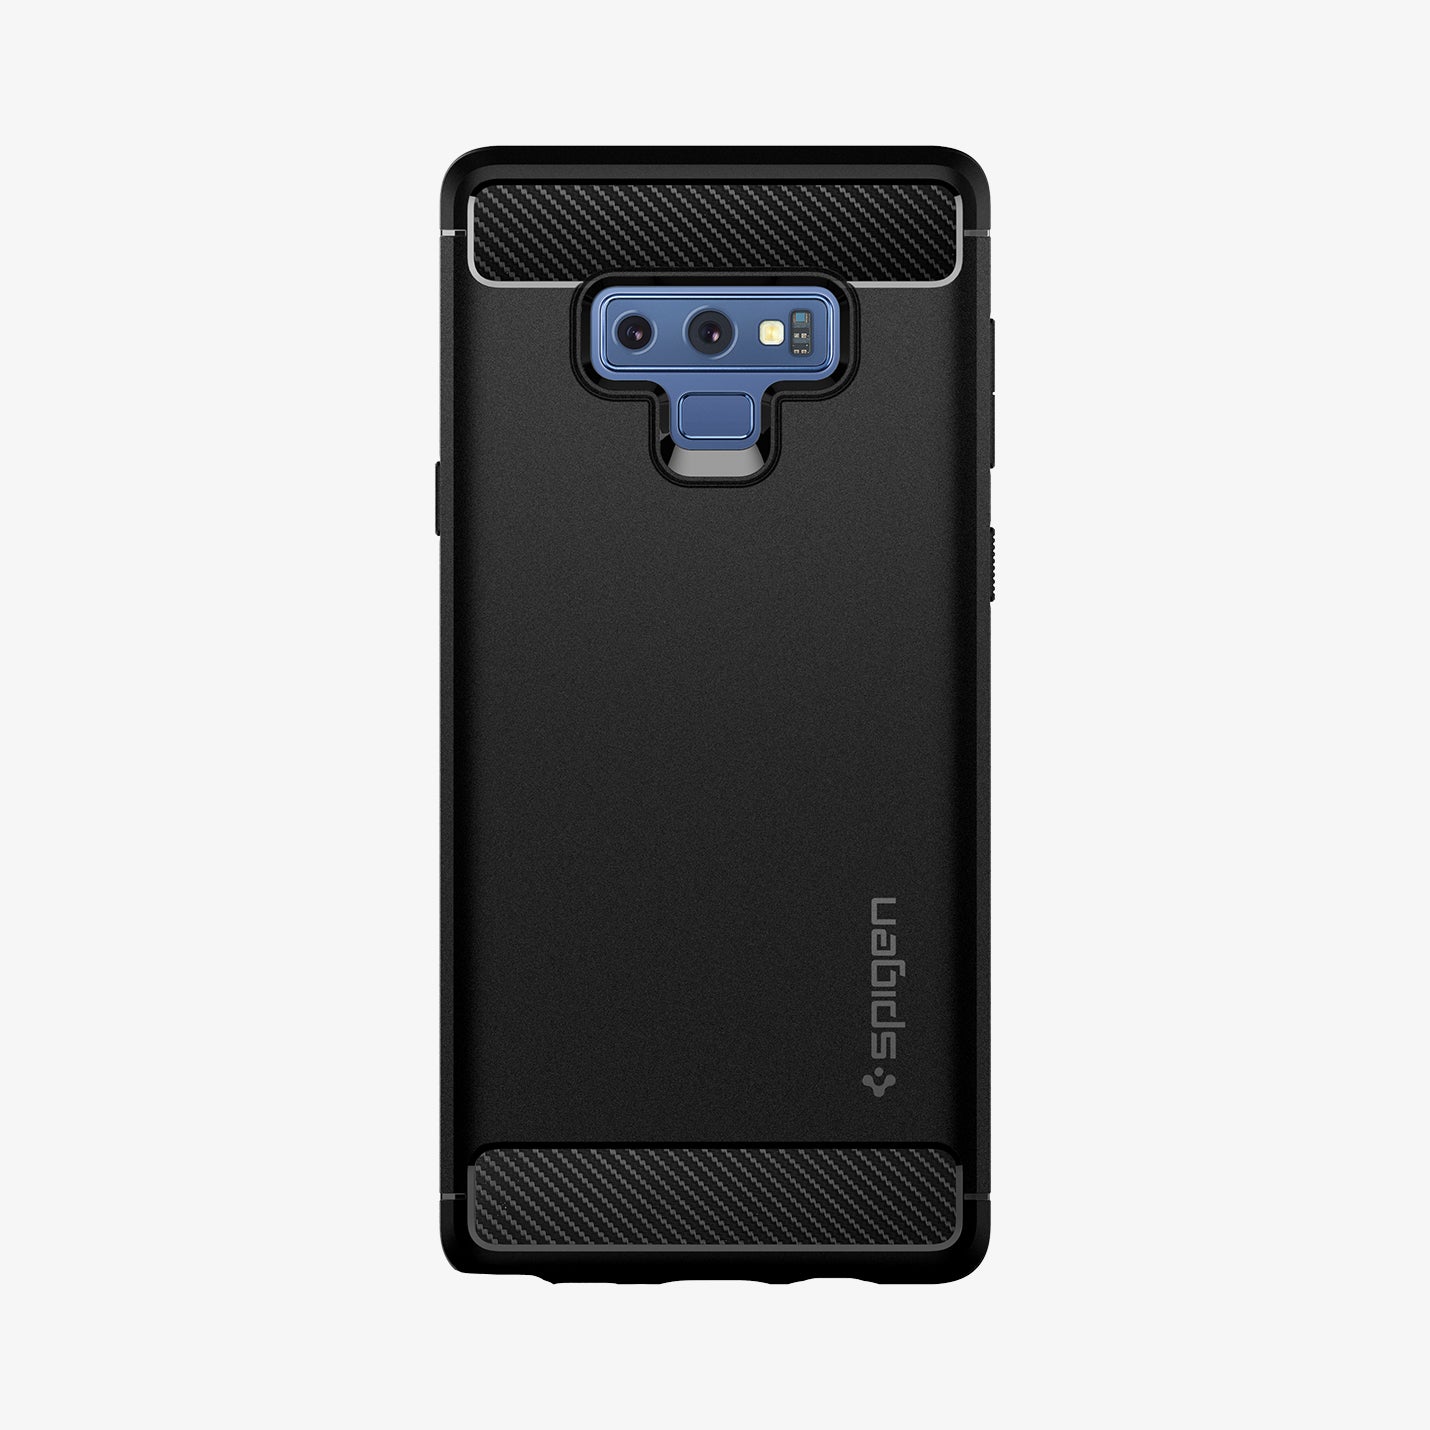 599CS24572 - Galaxy Note 9 Case Rugged Armor in matte black showing the back